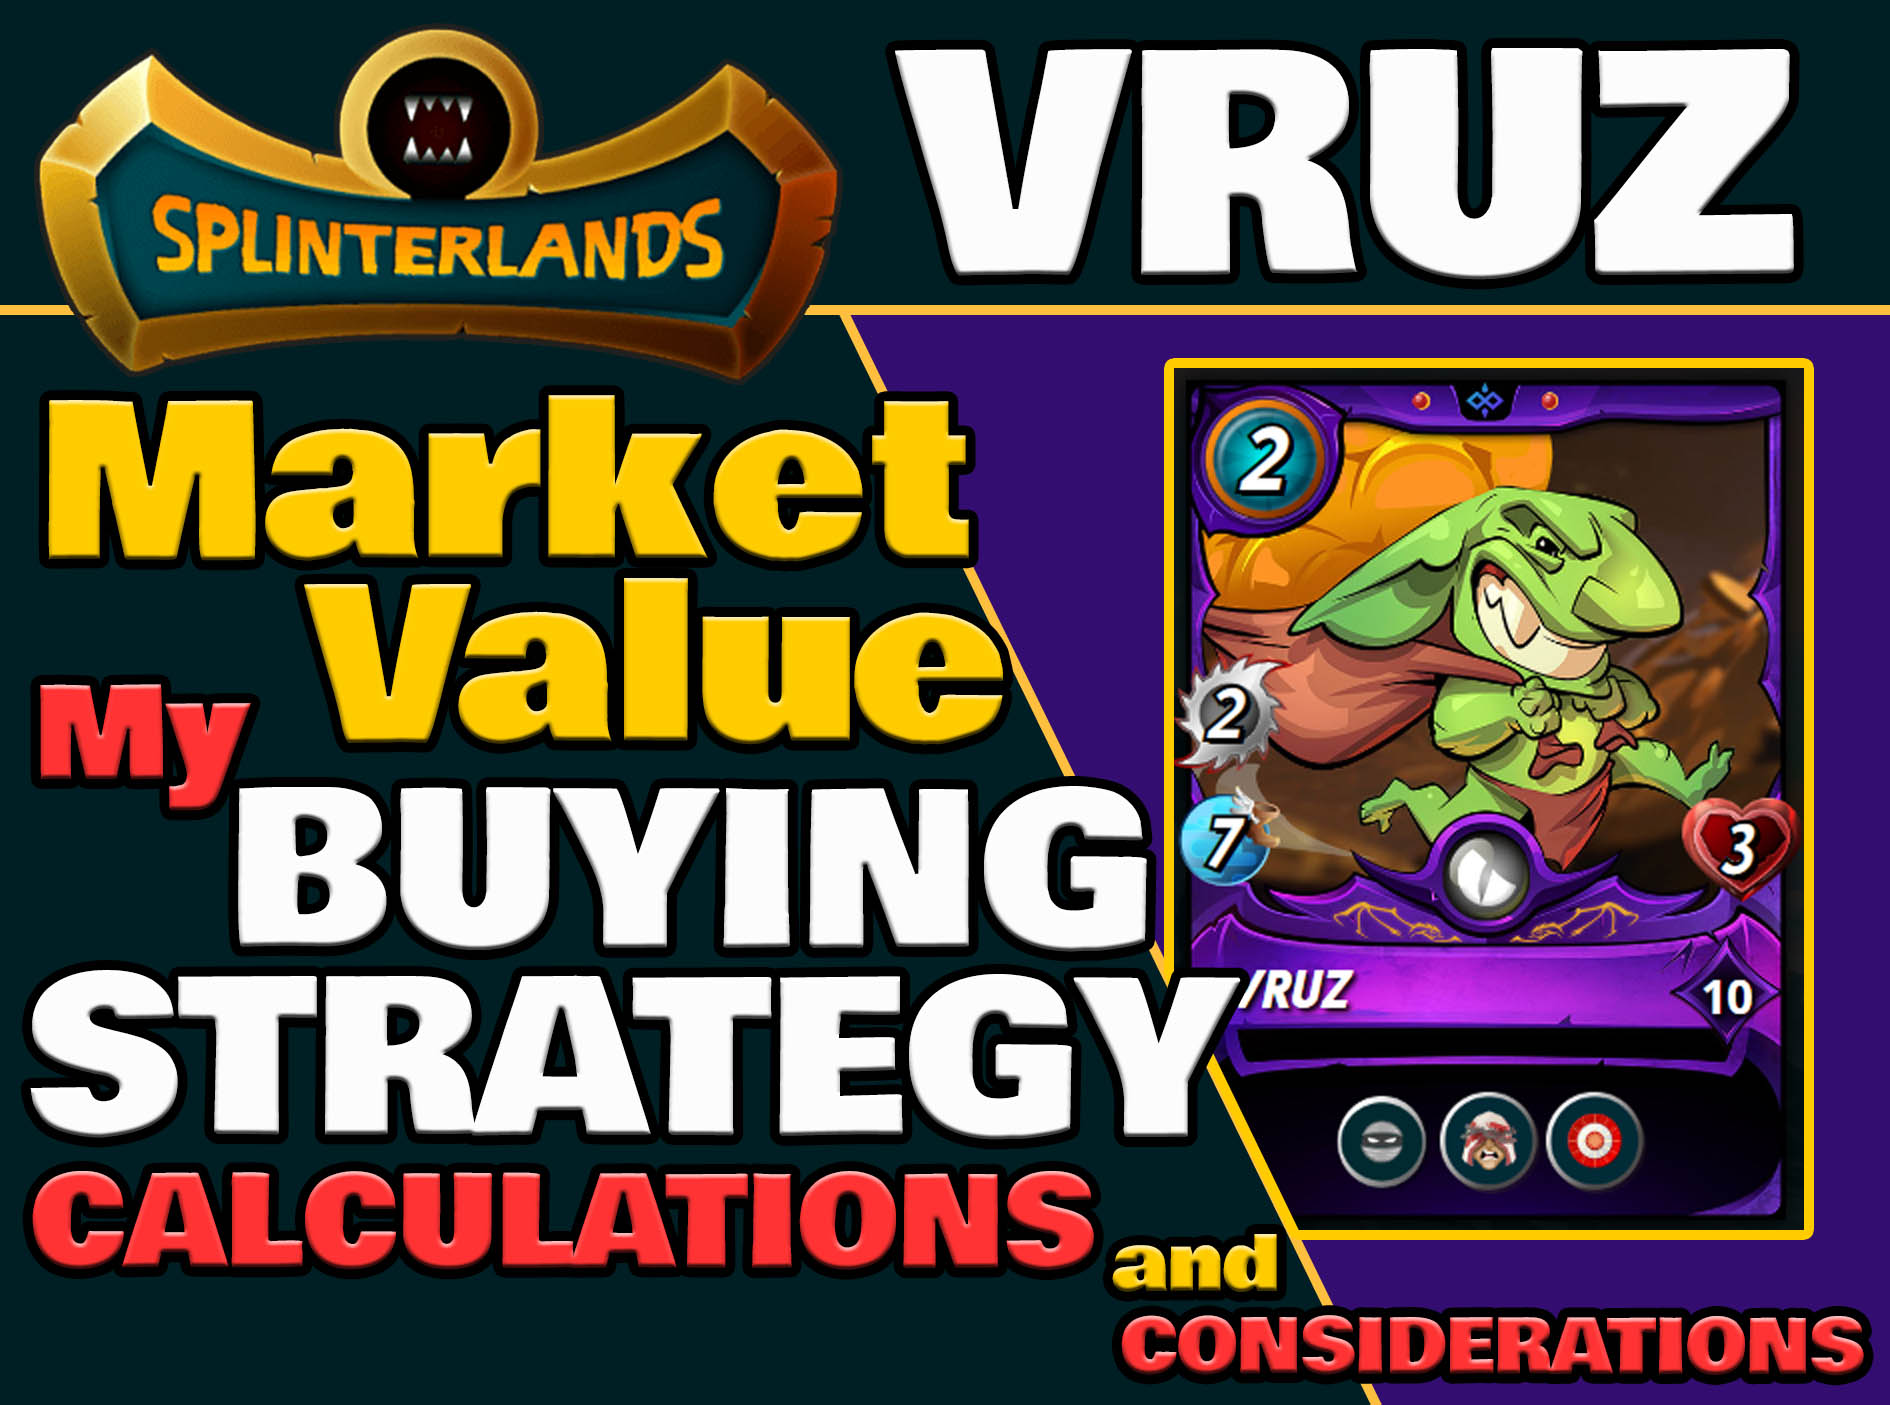 @libertycrypto27/vruz-sale-market-value-my-buying-strategy-calculations-and-considerations-eng-ita